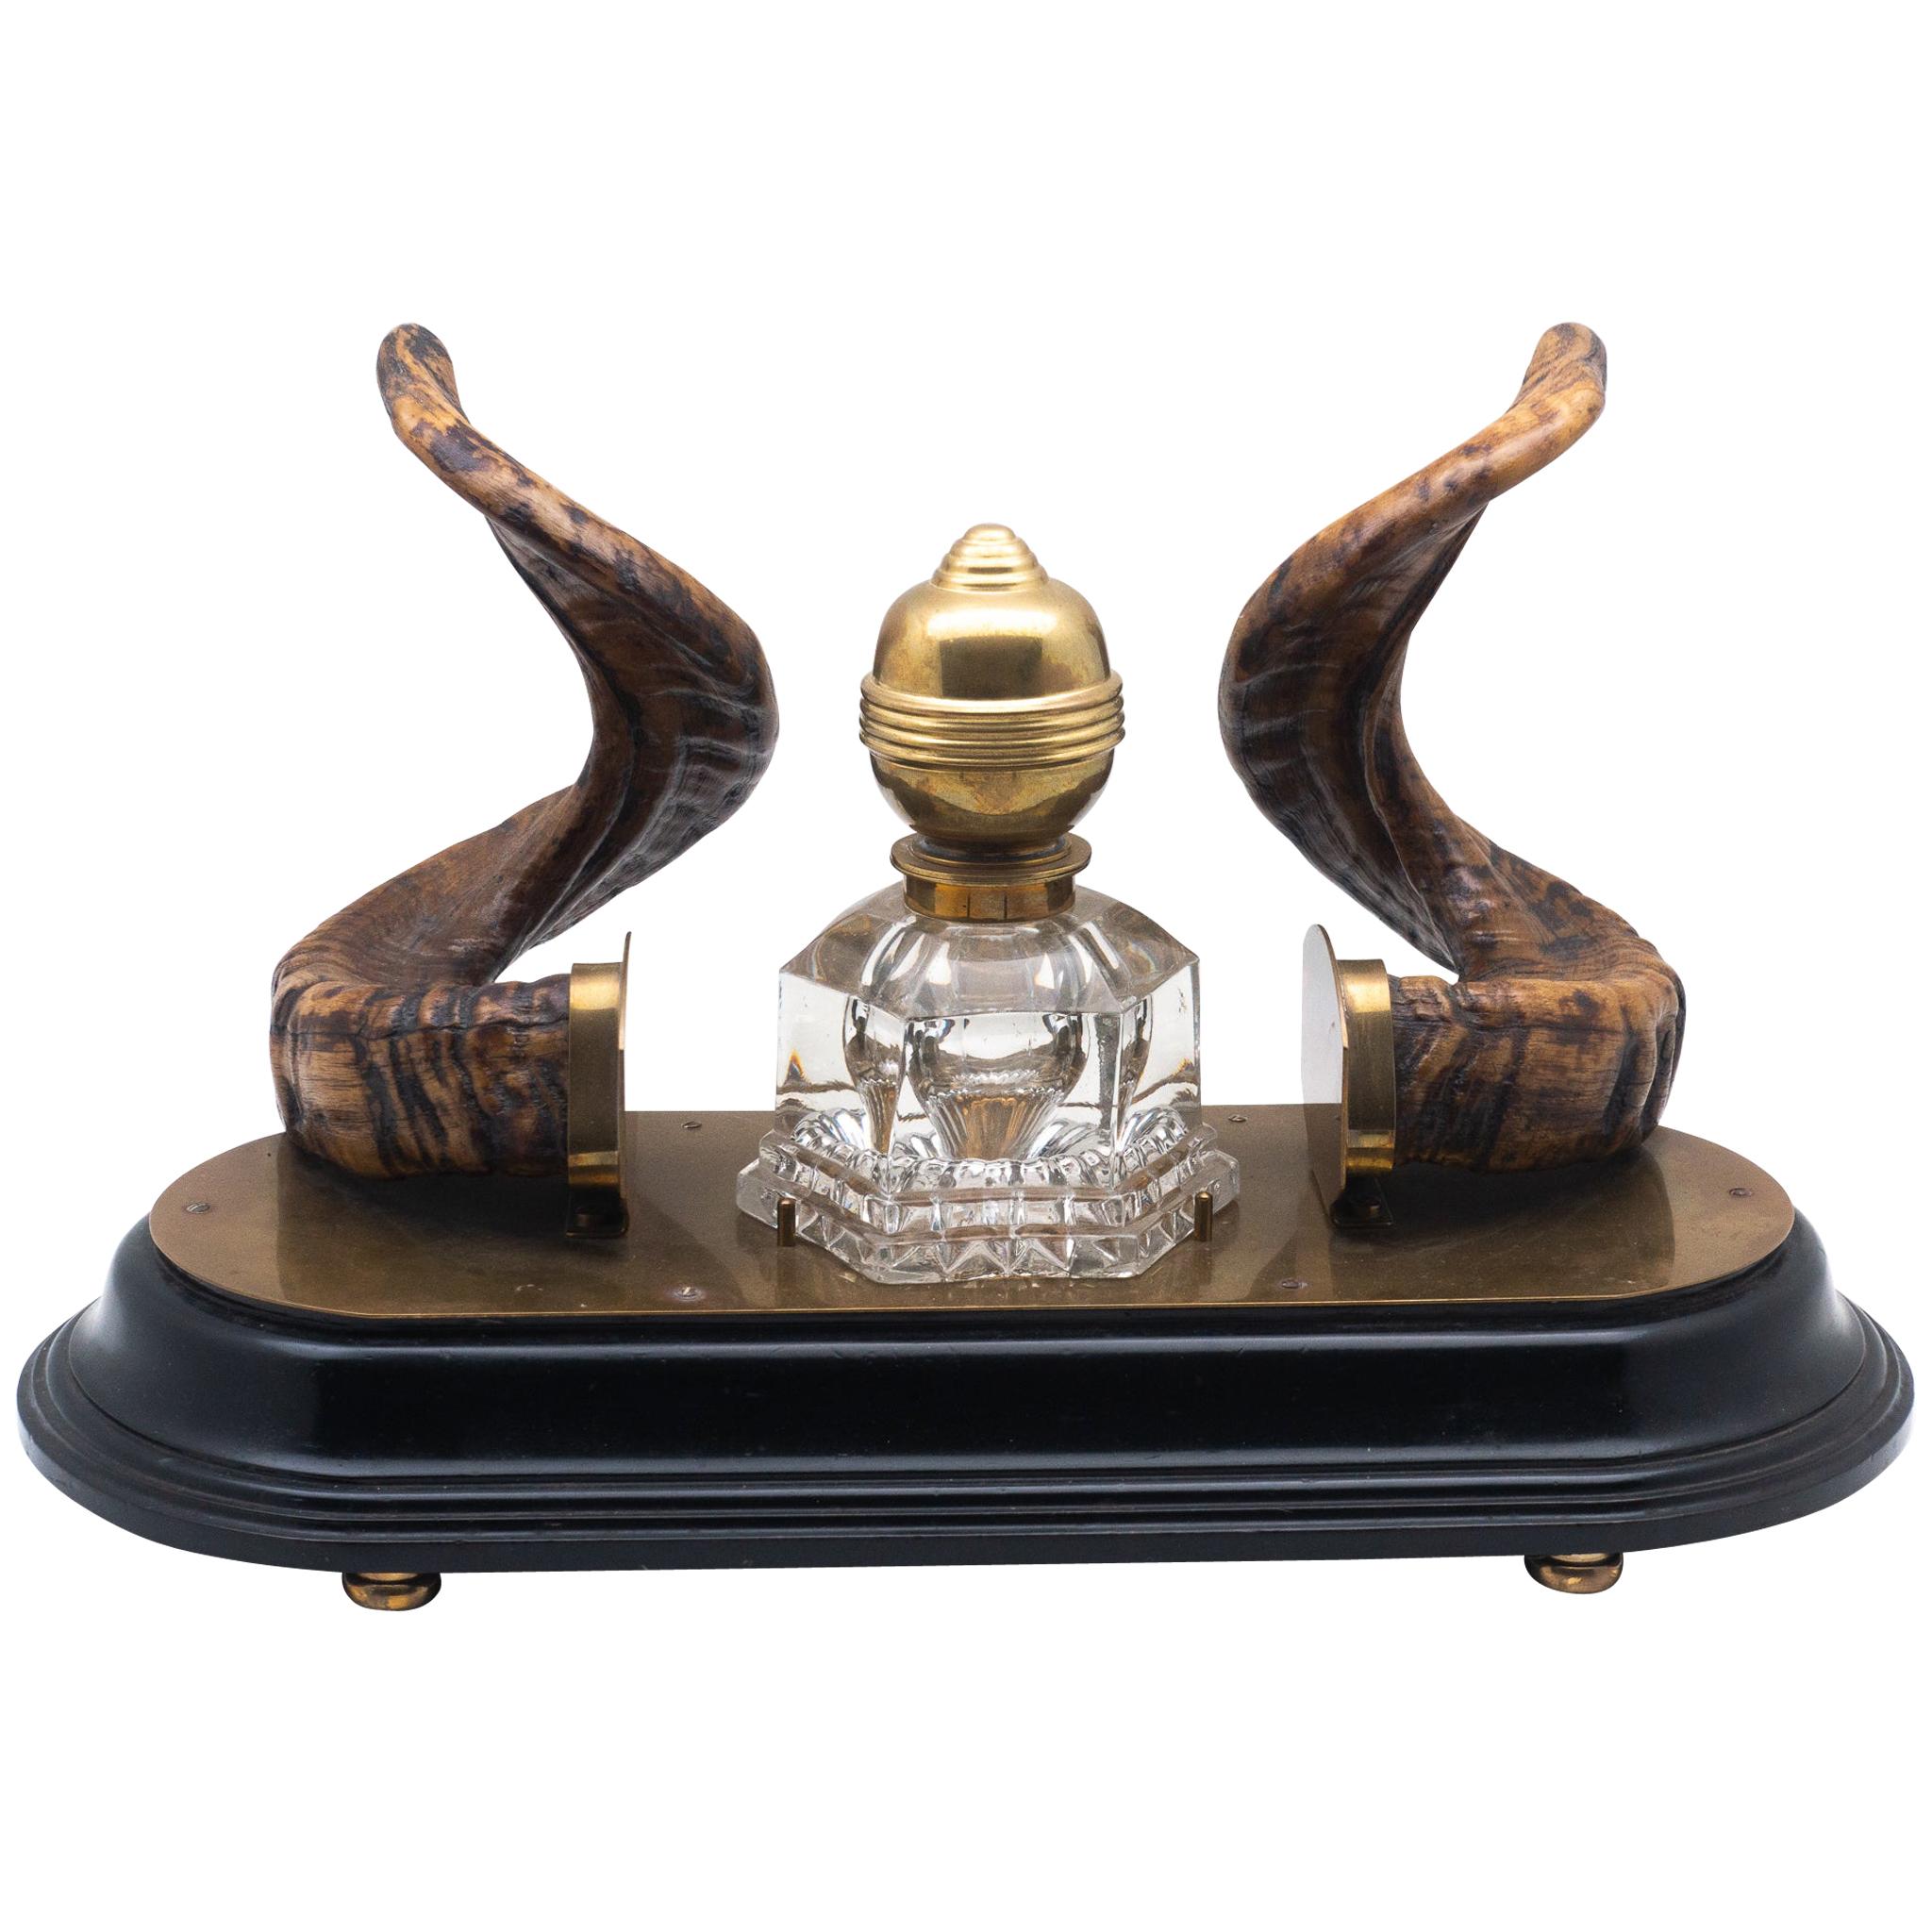 19th Century Ram's Horn Decorated Inkwell, Possibly Scottish